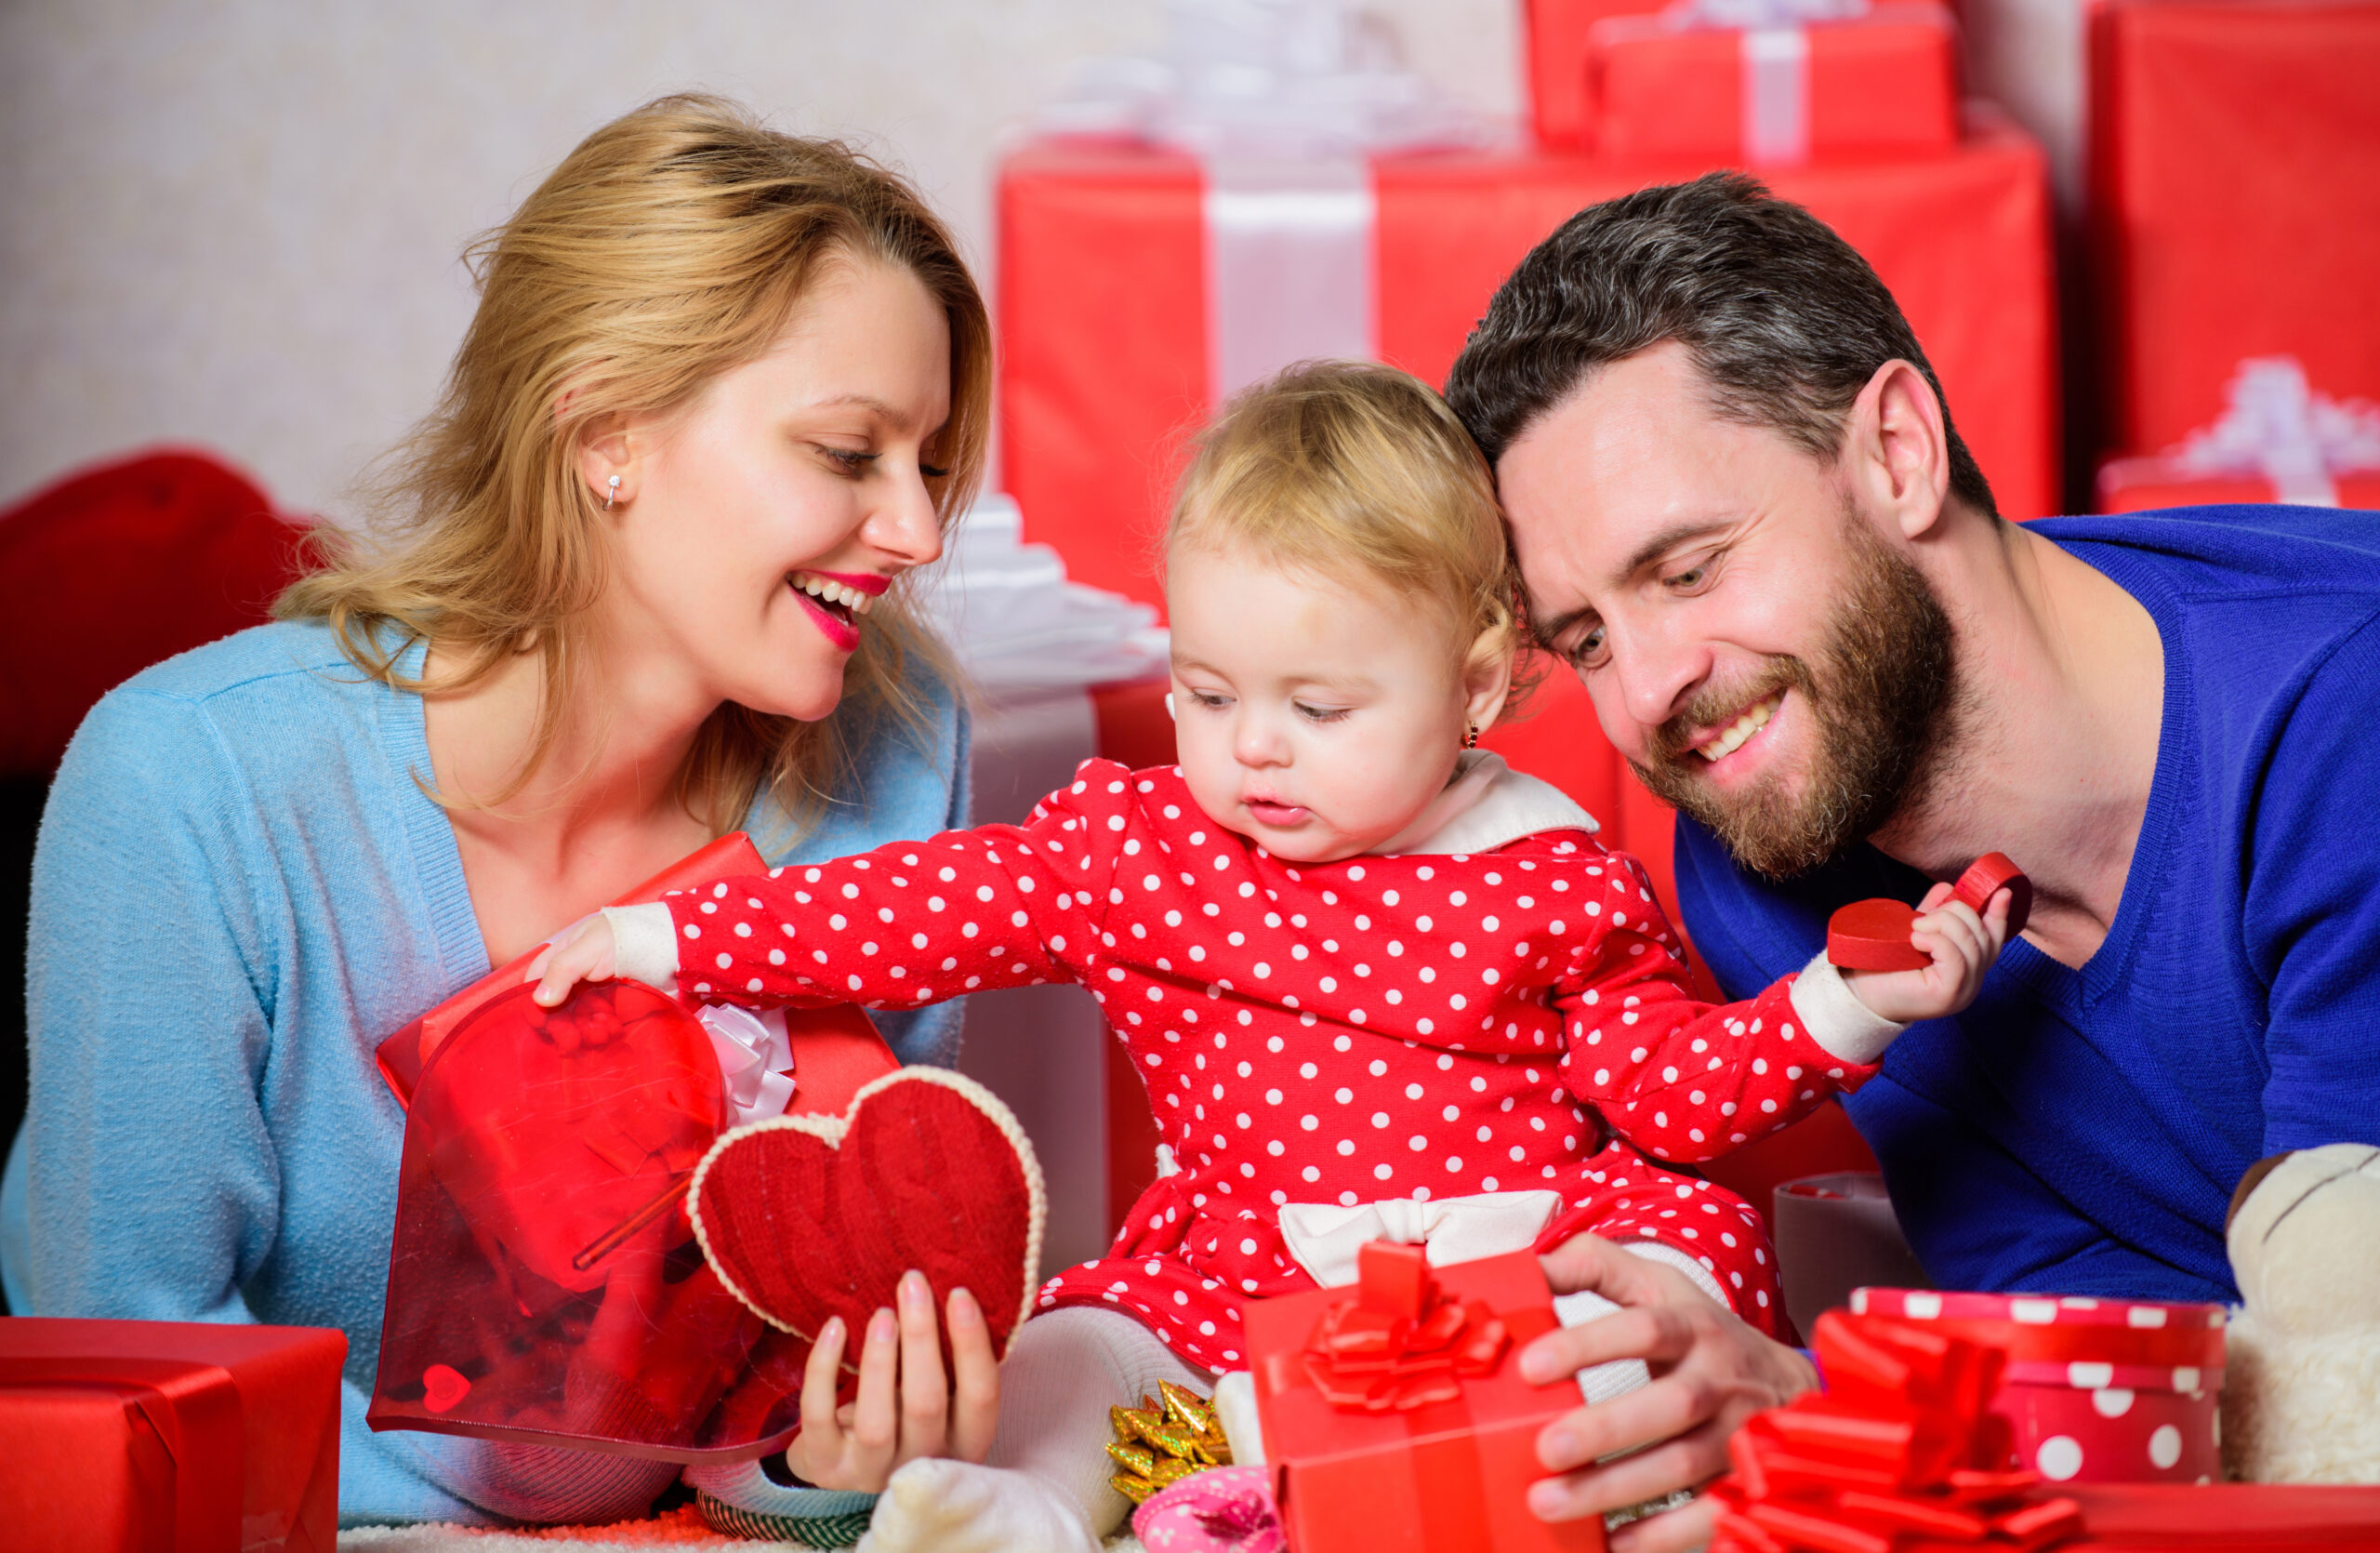 couple in love and baby girl. valentines day concept. together on valentines day. lovely family celebrating valentines day. happy parents. family celebrate anniversary. day to celebrate their love